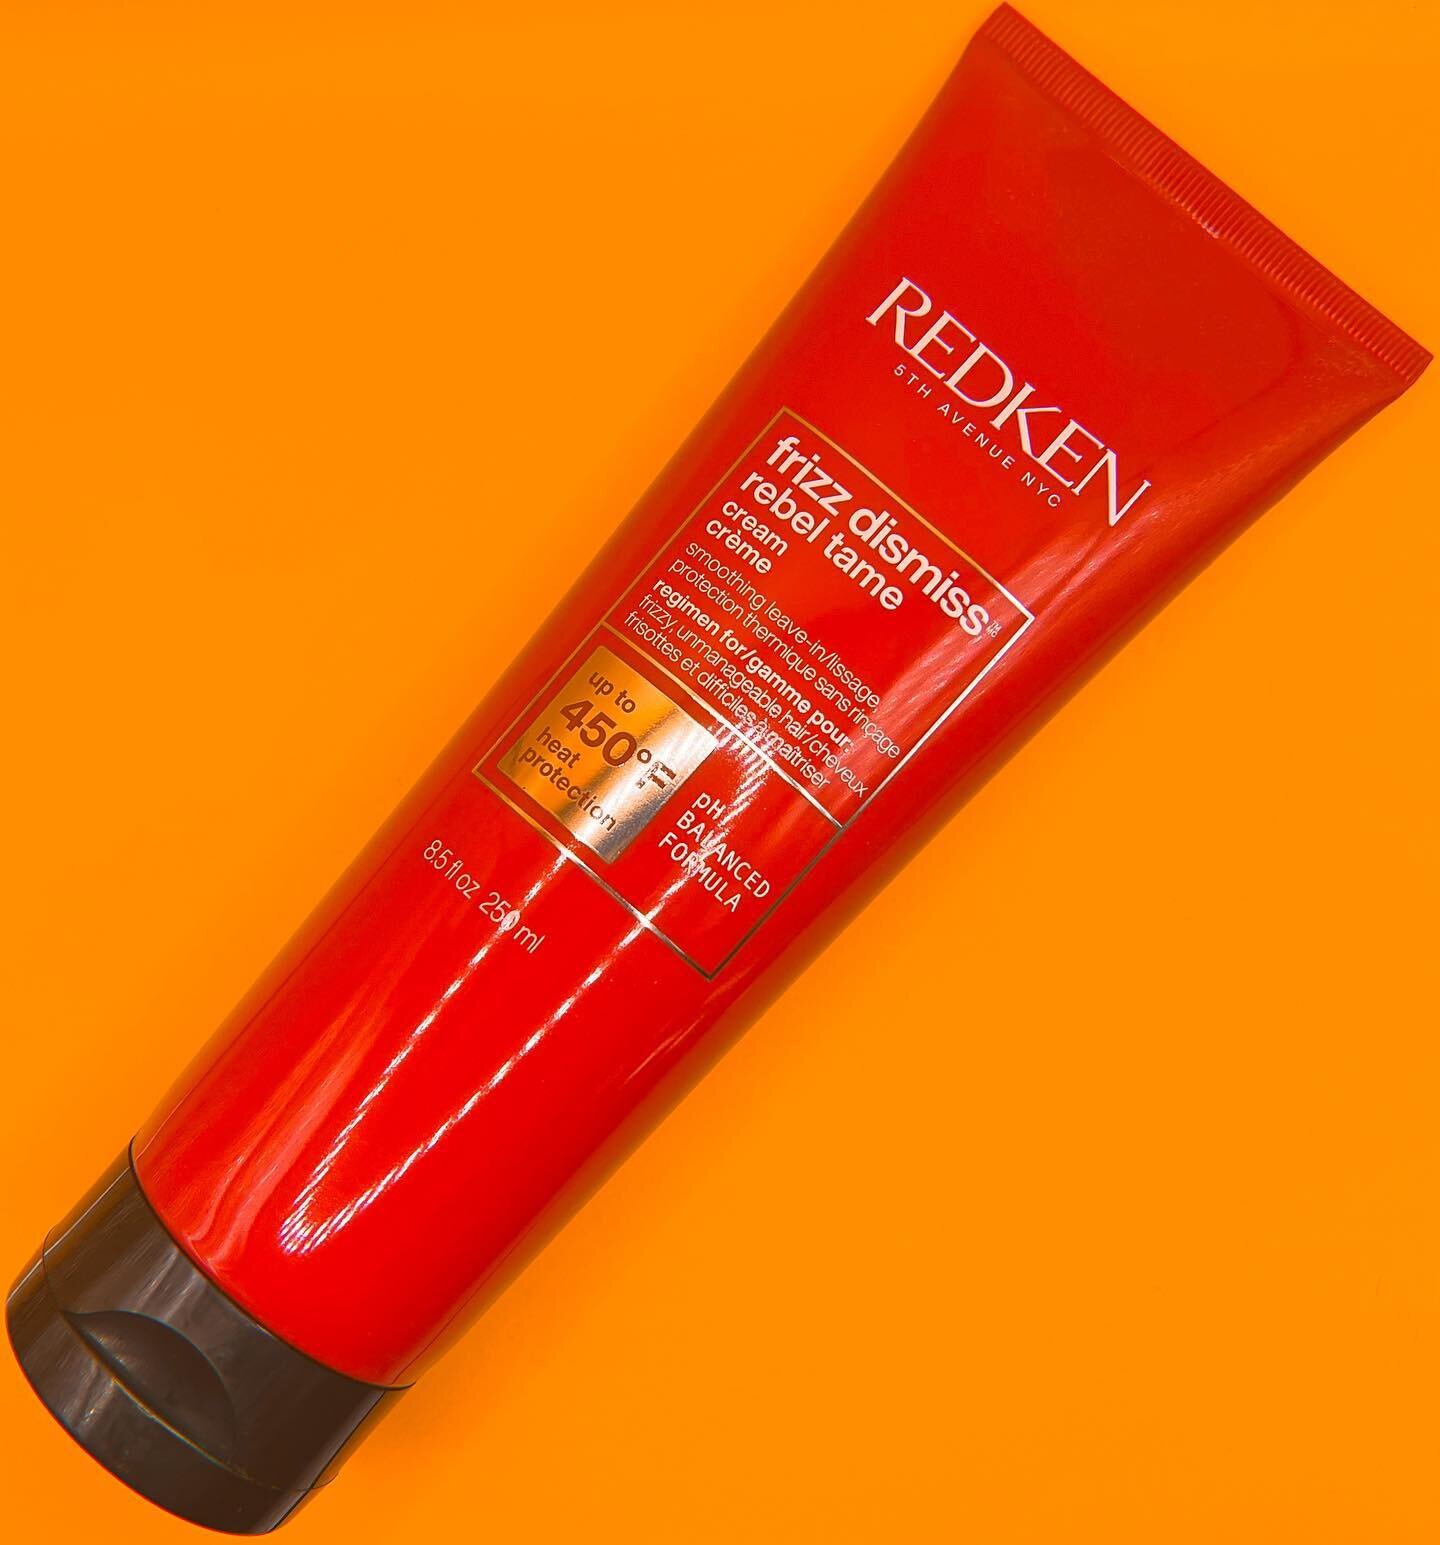 Frizz be gone! 

Redken Frizz Dismiss Rebel Tame leave-in conditioner features a smoothing complex using Babassu Oil. 

❗️Multi-benefit smoothing cream for all hair types
❗️Hydrates, detangles, and provides the ultimate frizz control
❗️Best for unrul